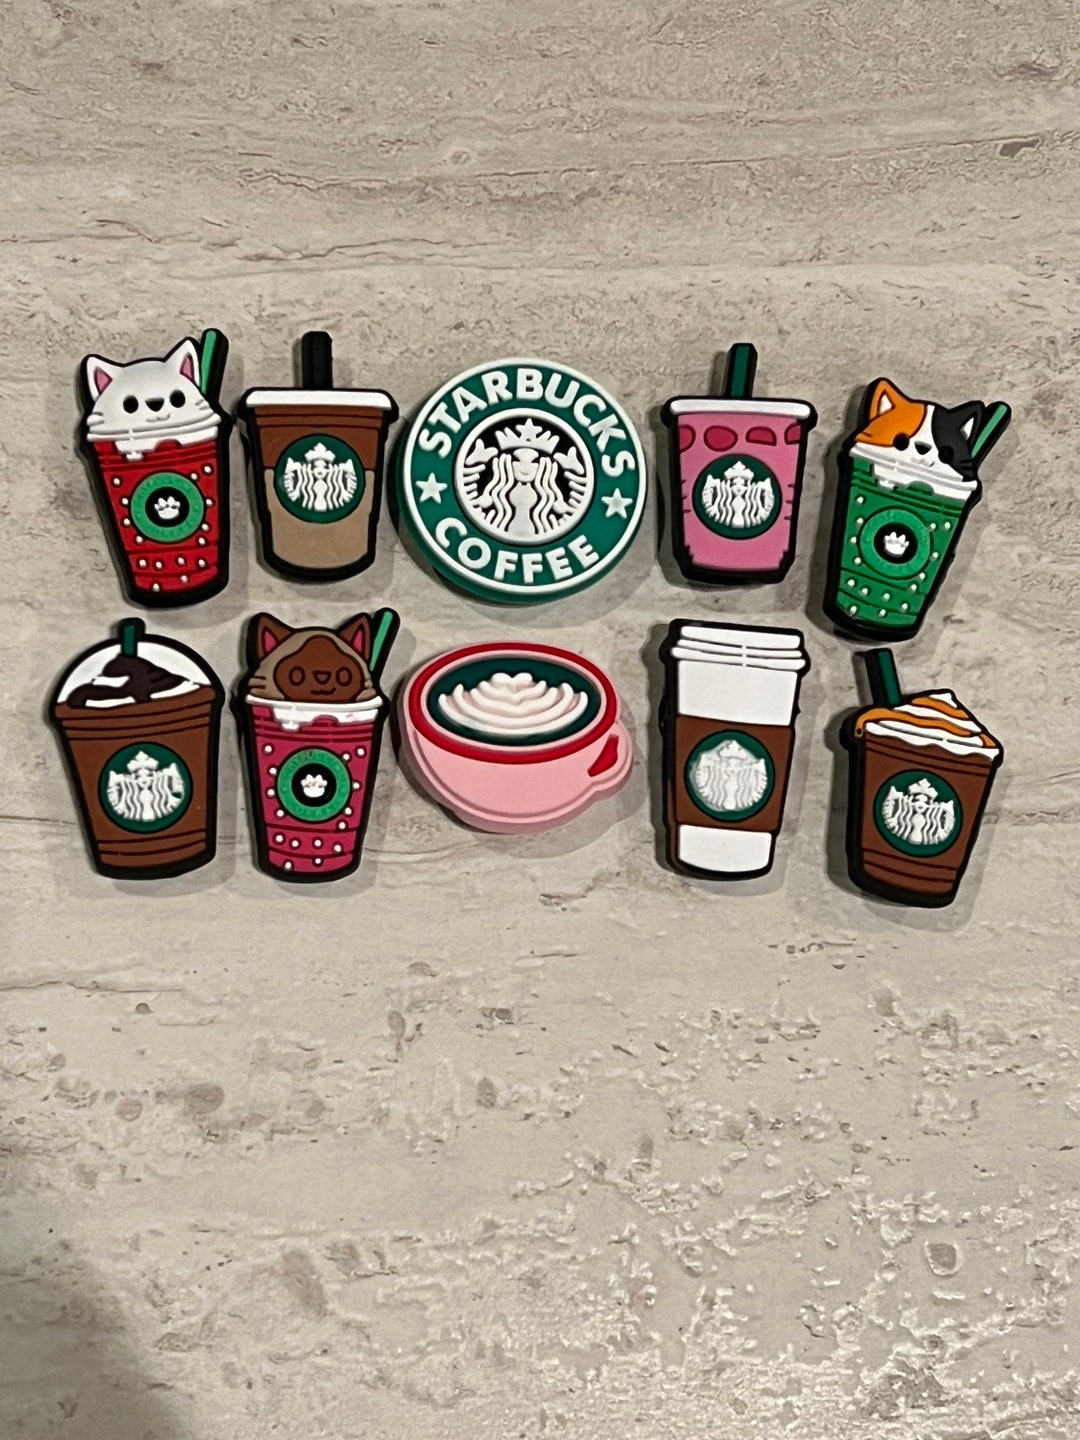 Starbucks Croc Charms – Charms and Sparkle by Ria